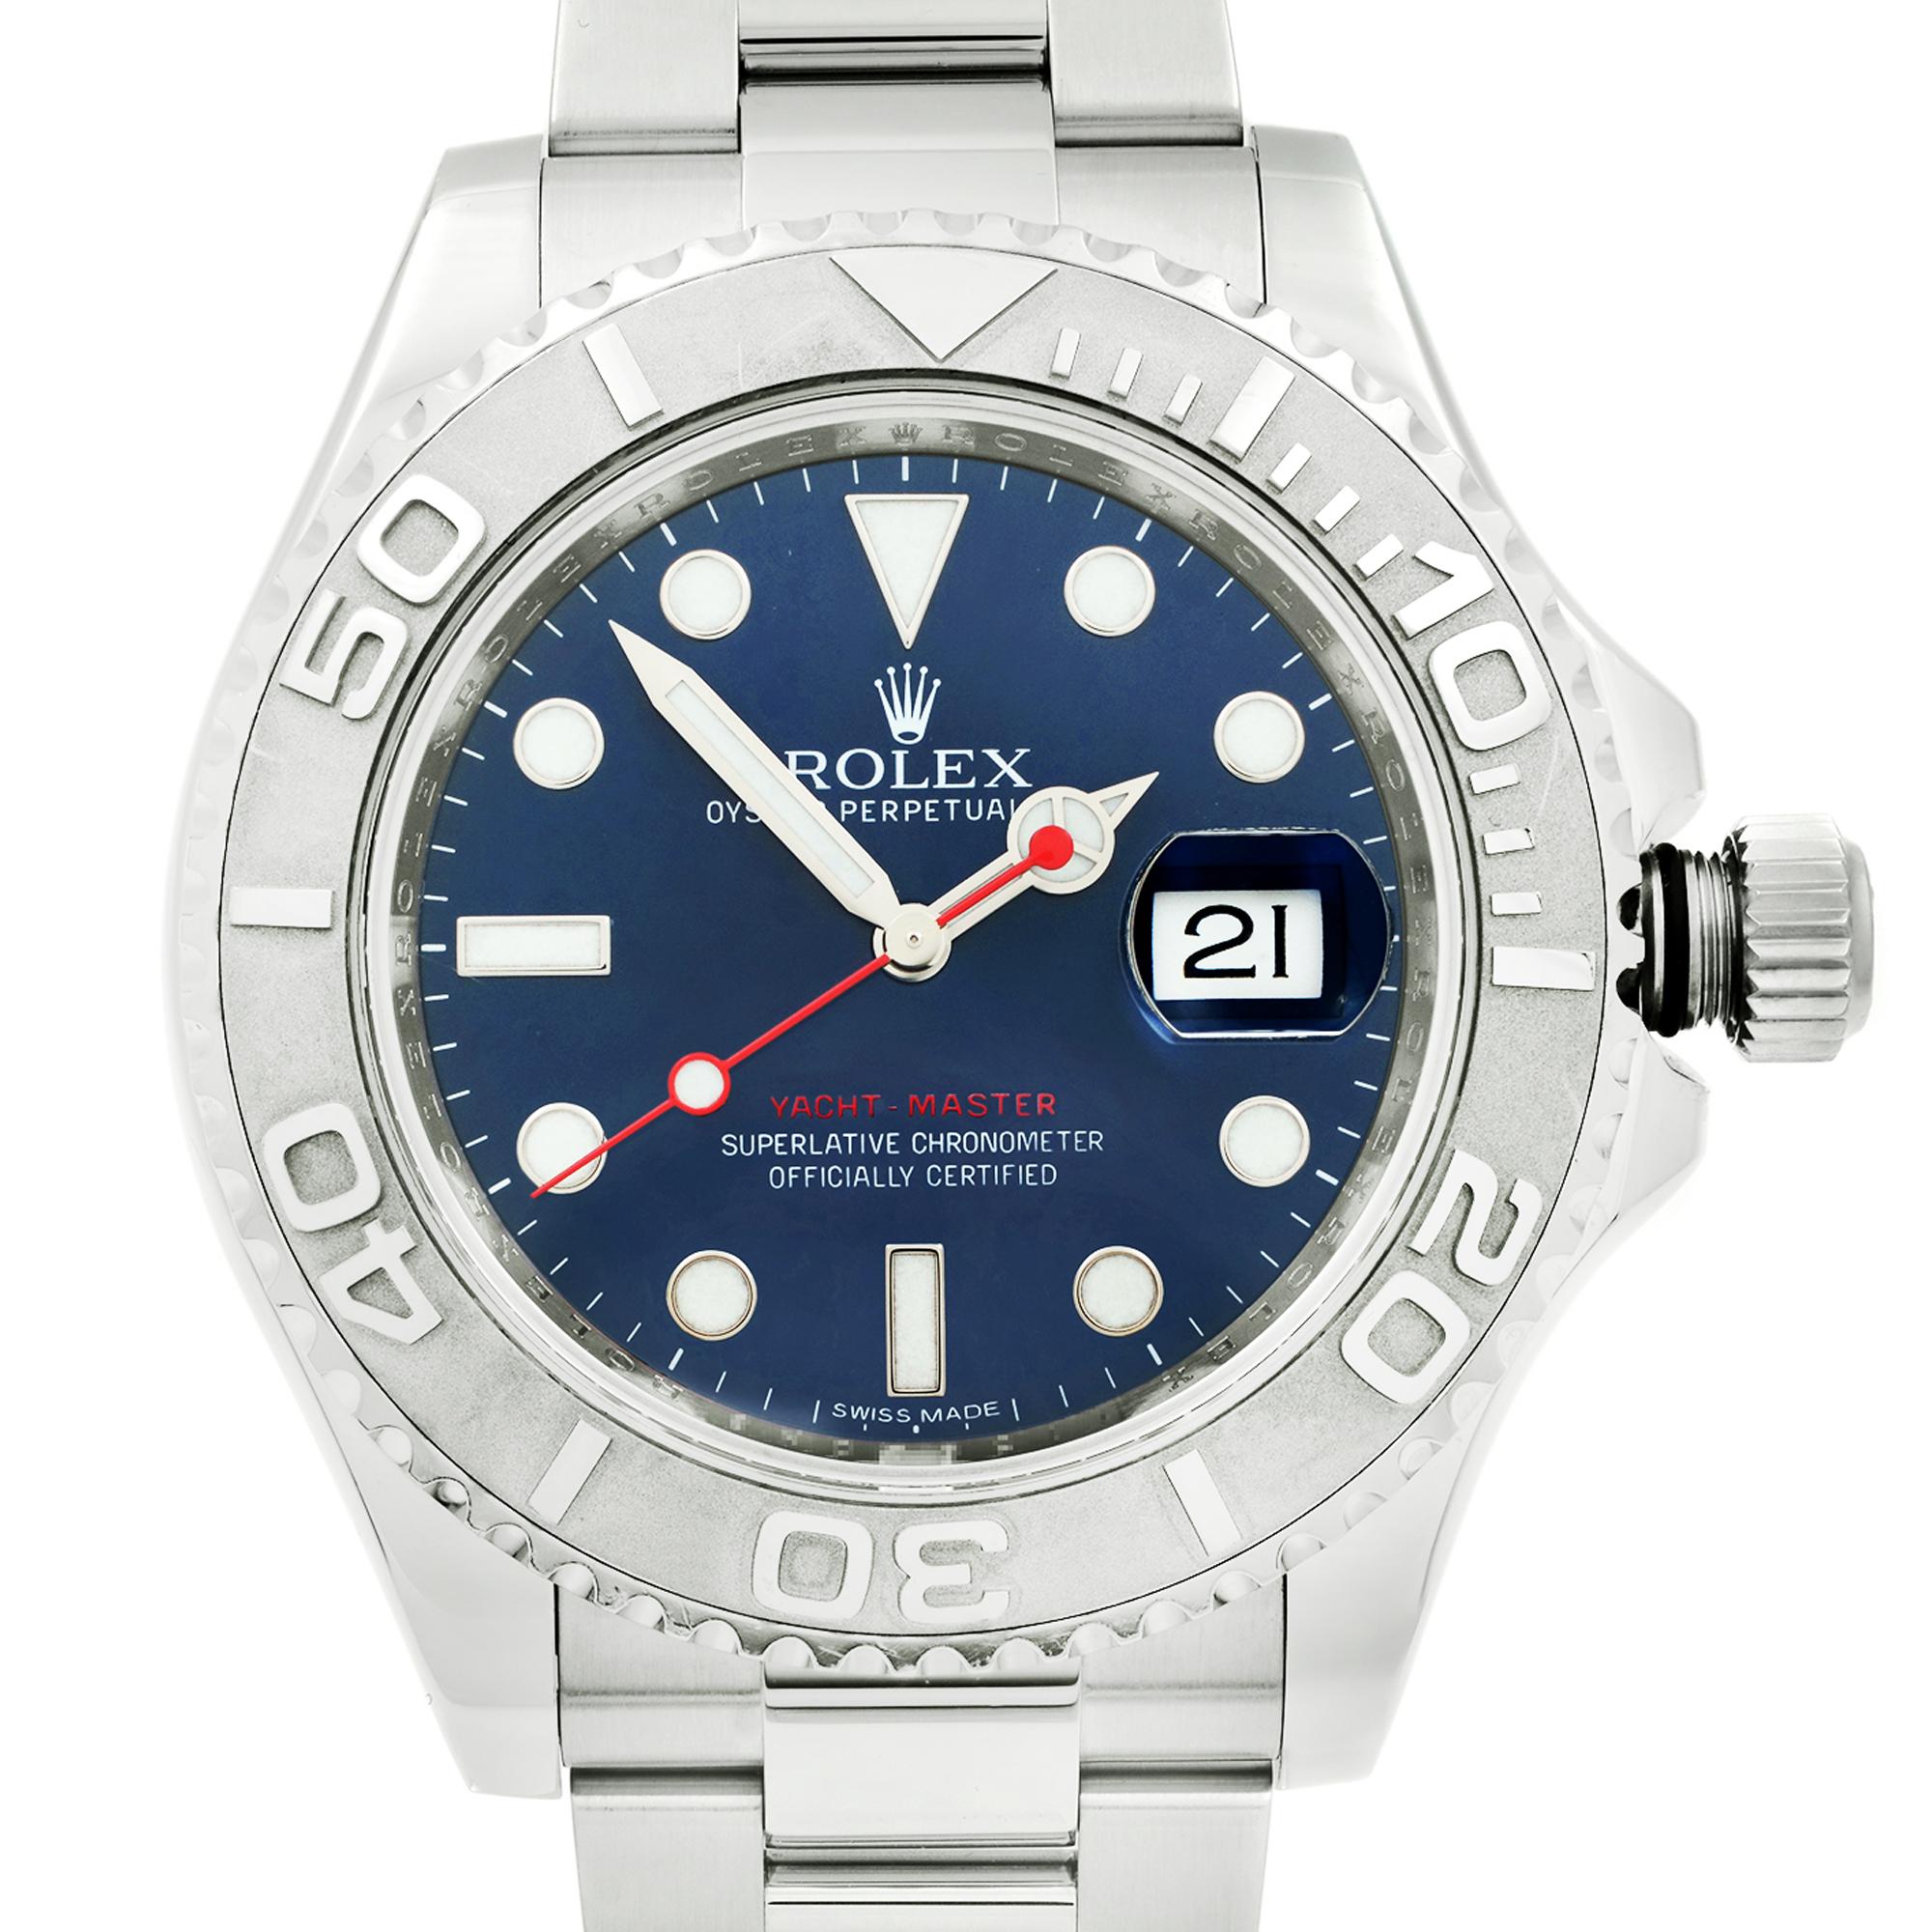 Pre-owned in good condition. No original box and papers. Comes with a chronostore box.

Rolex Yacht-Master Wristwatch - Model 116622

General Information
Brand: Rolex
Model: Rolex Yacht-Master 116622
Model Number: 116622
Country/Region of